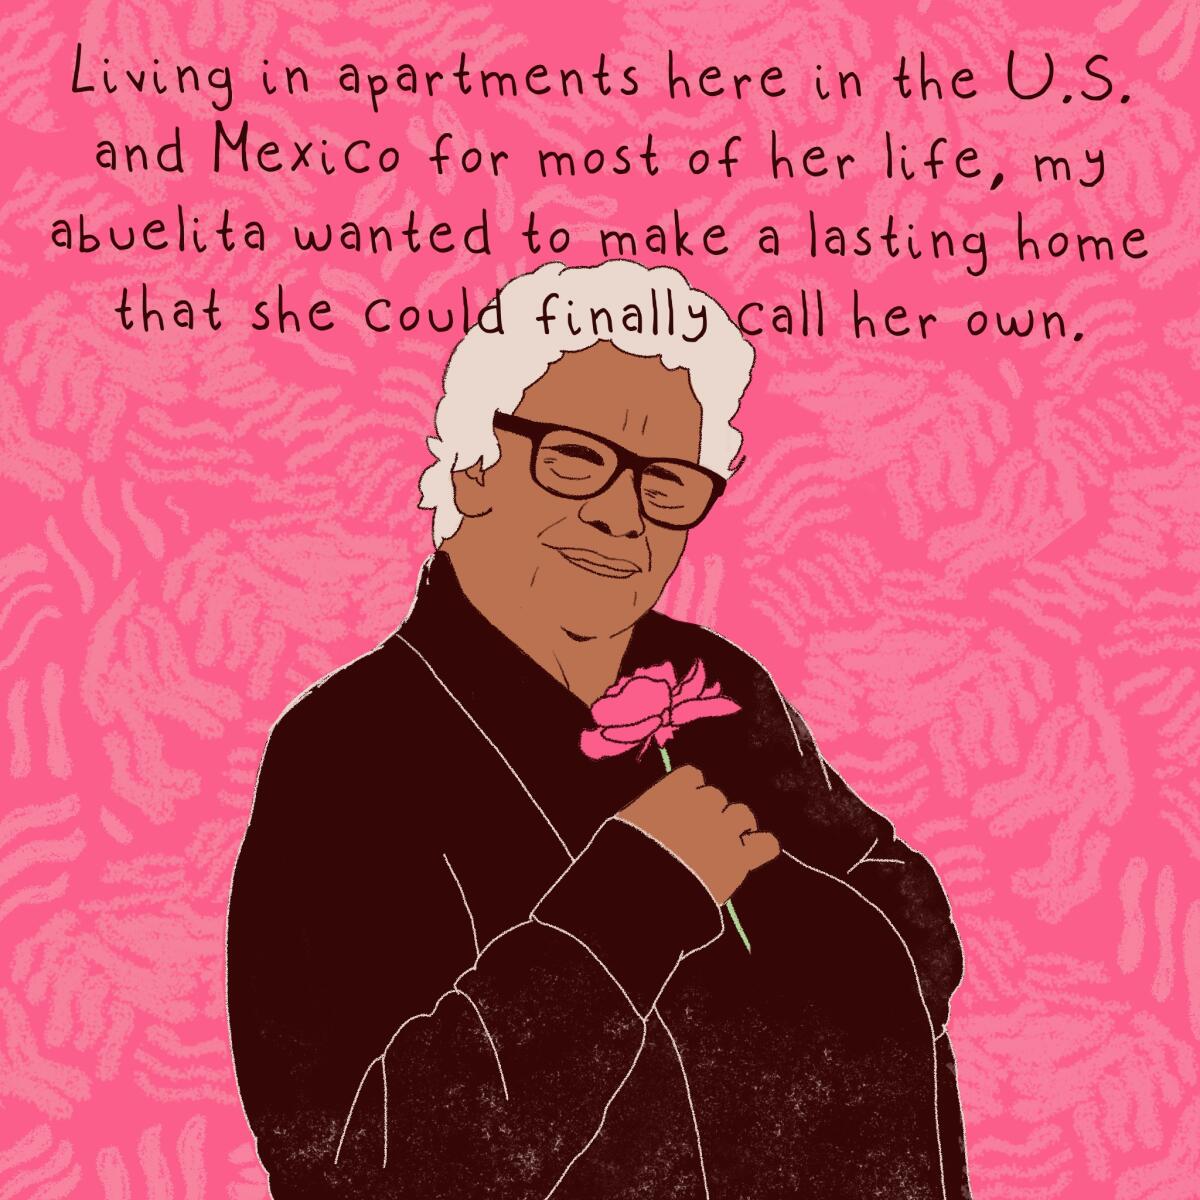 Living in apartments for most of her life, my abuelita wanted to make a lasting home that she could finally call her own. 